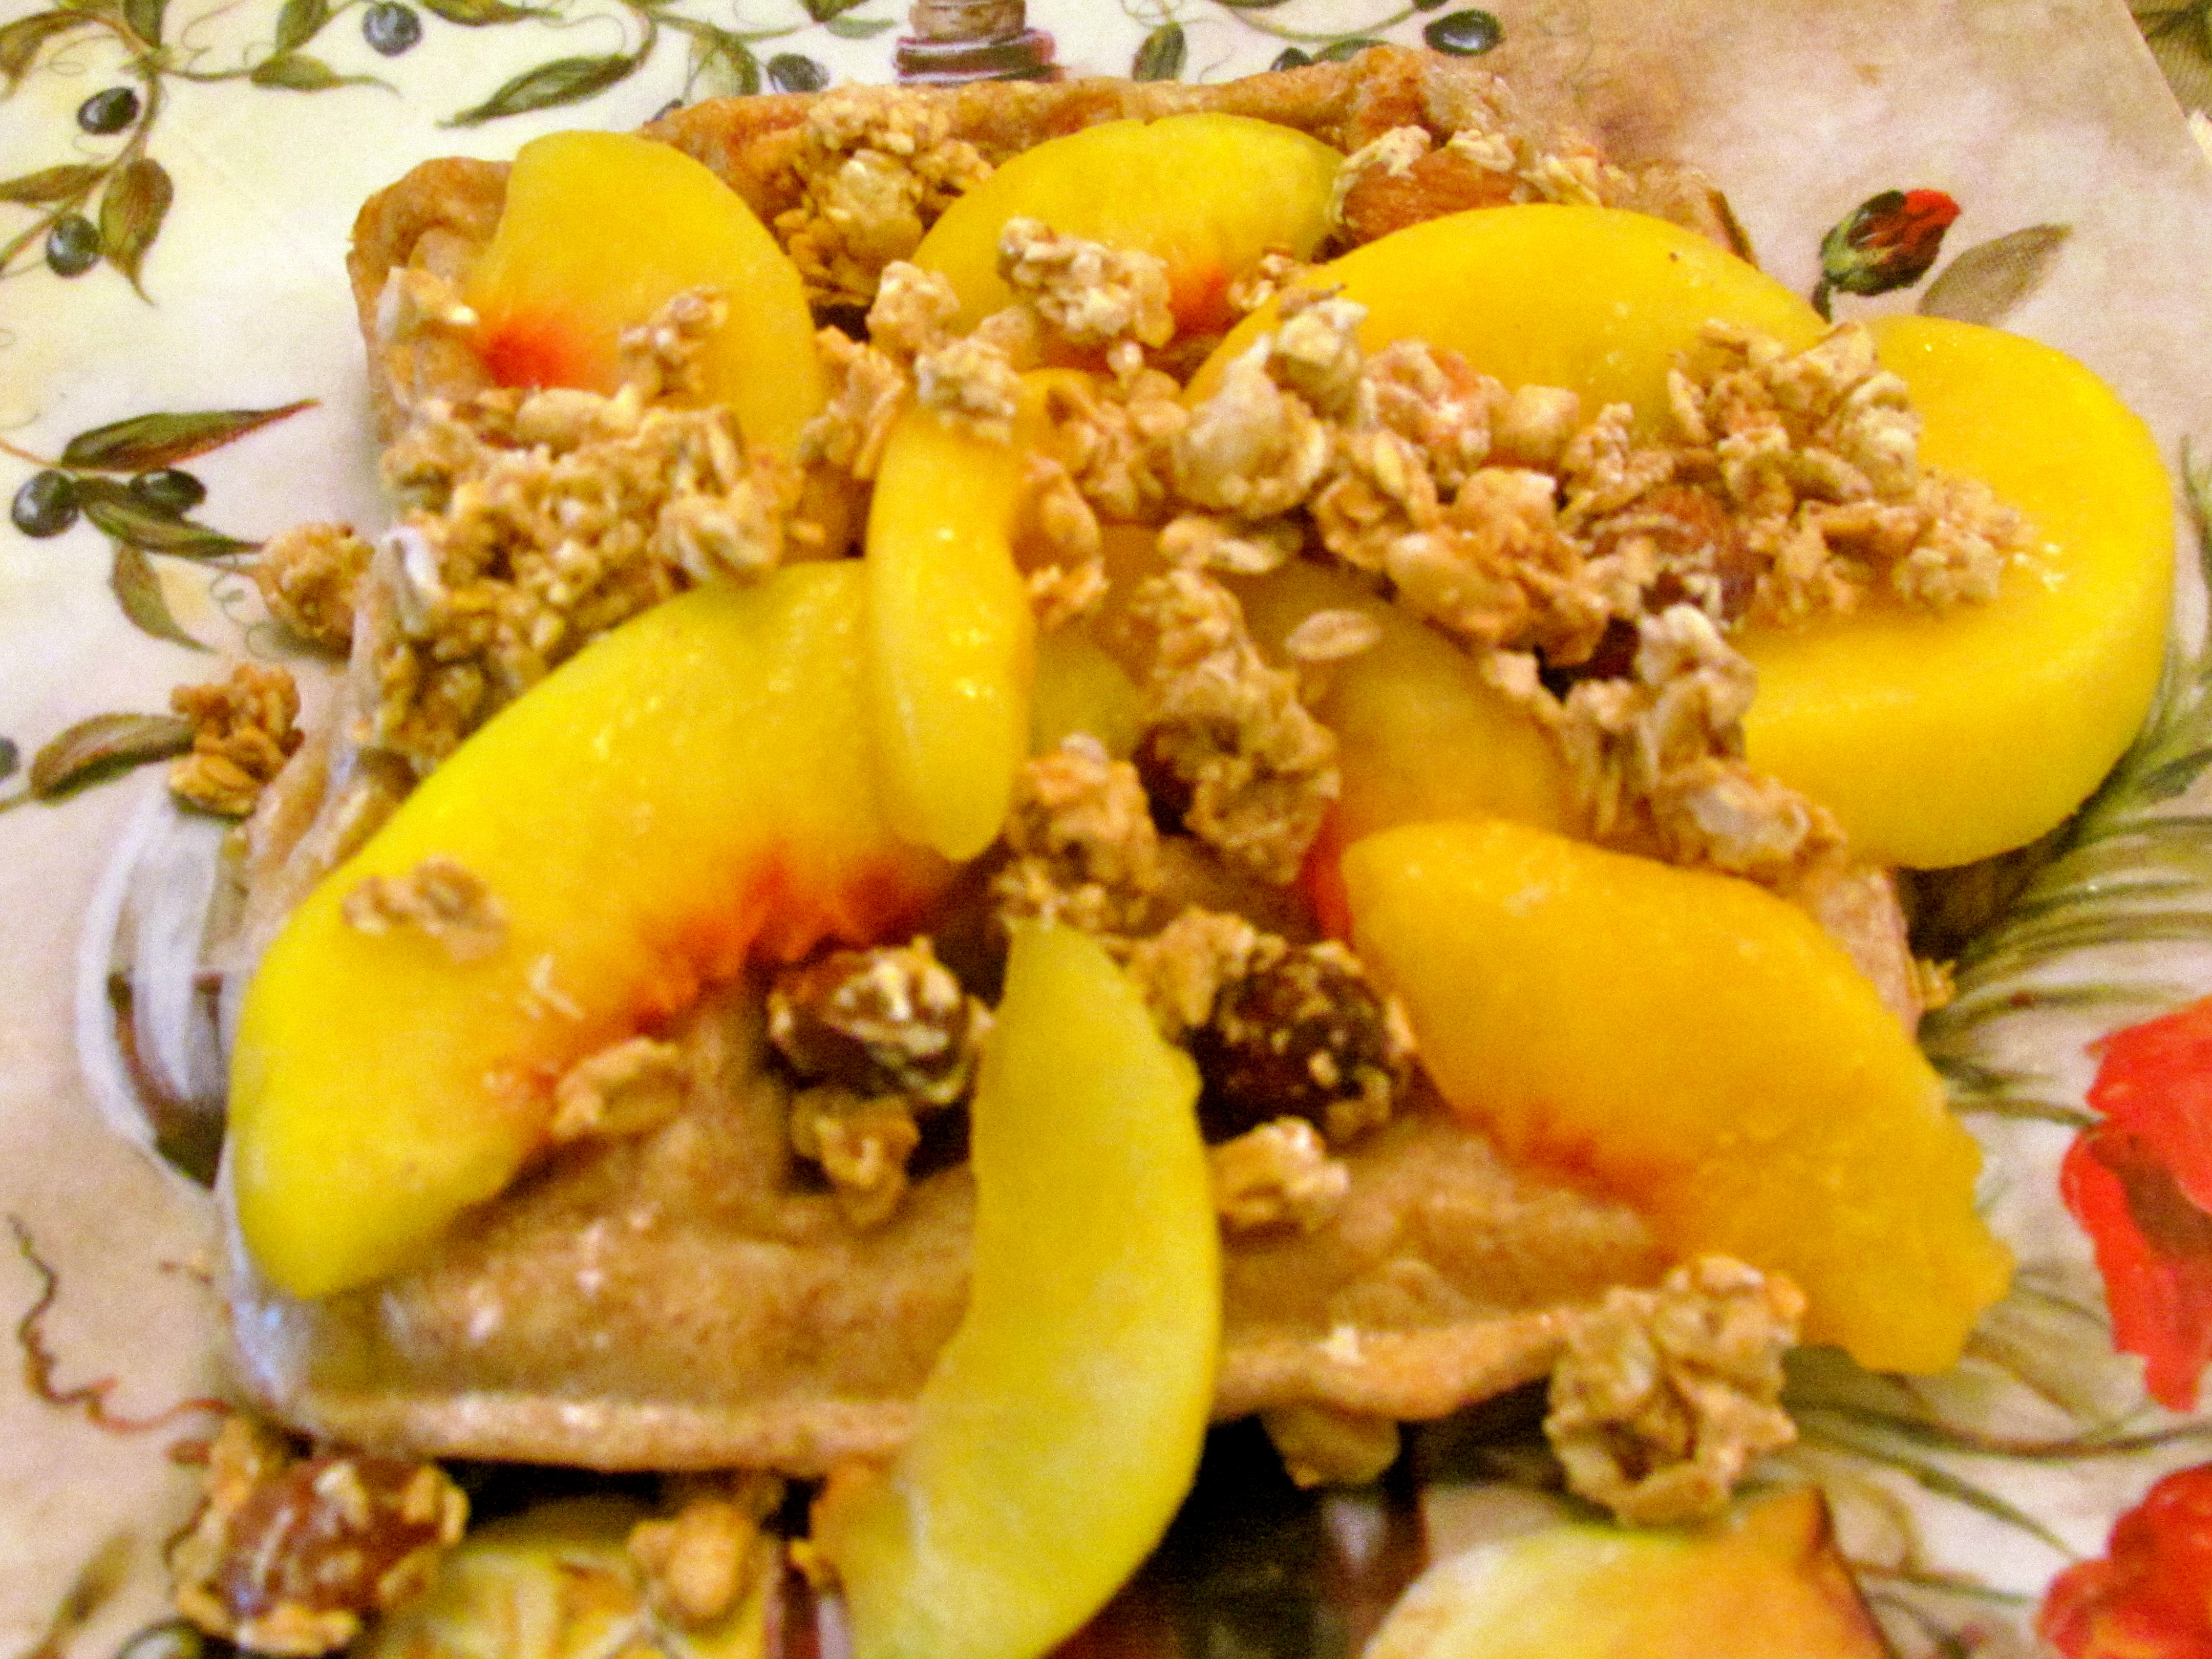 Peach & Granola Waffles + Active Rest Day Love